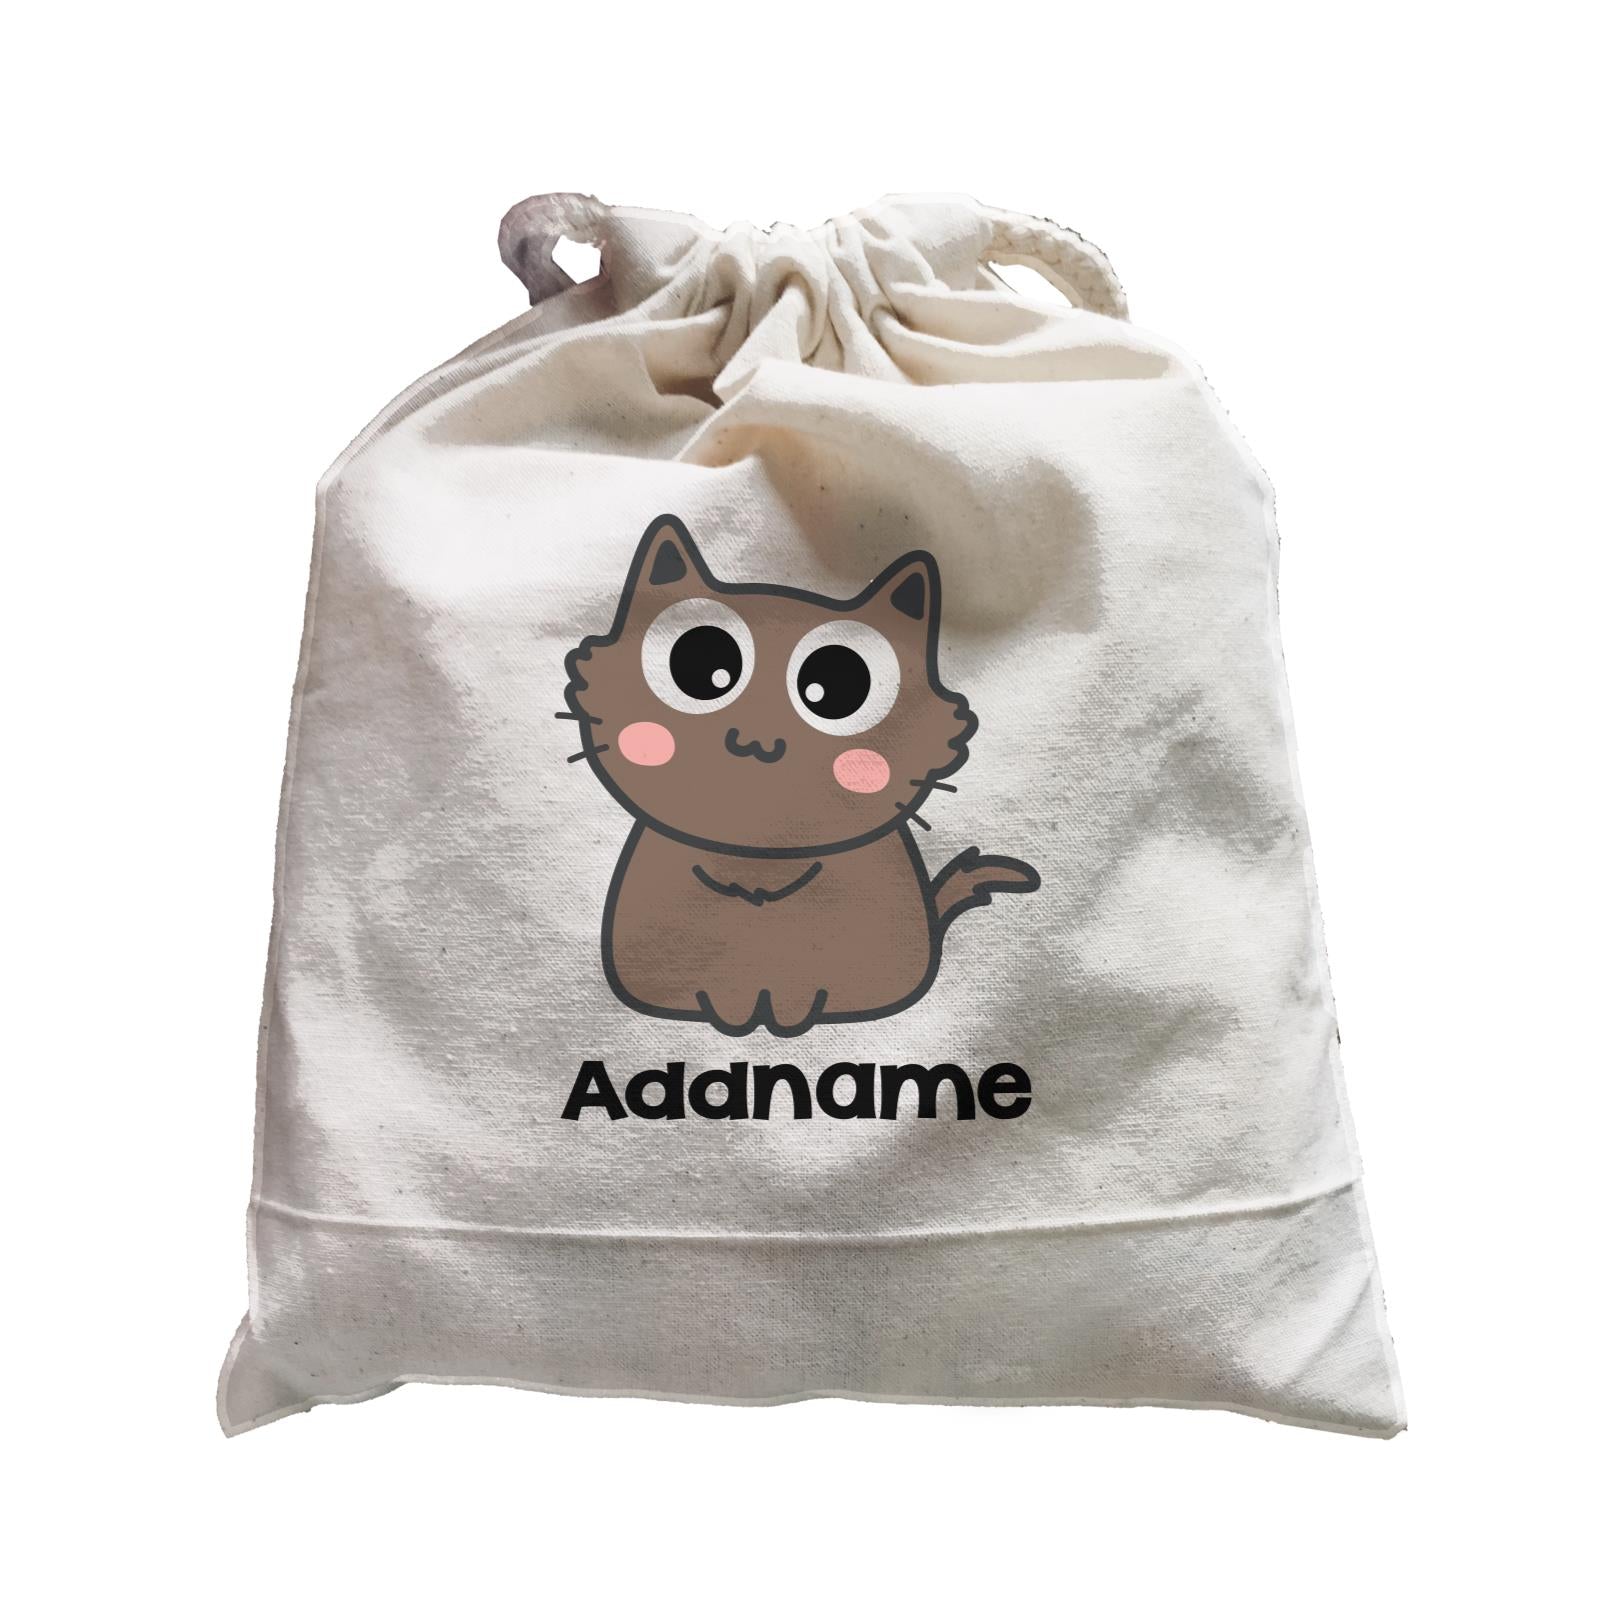 Drawn Adorable Cats Chocolate Addname Satchel